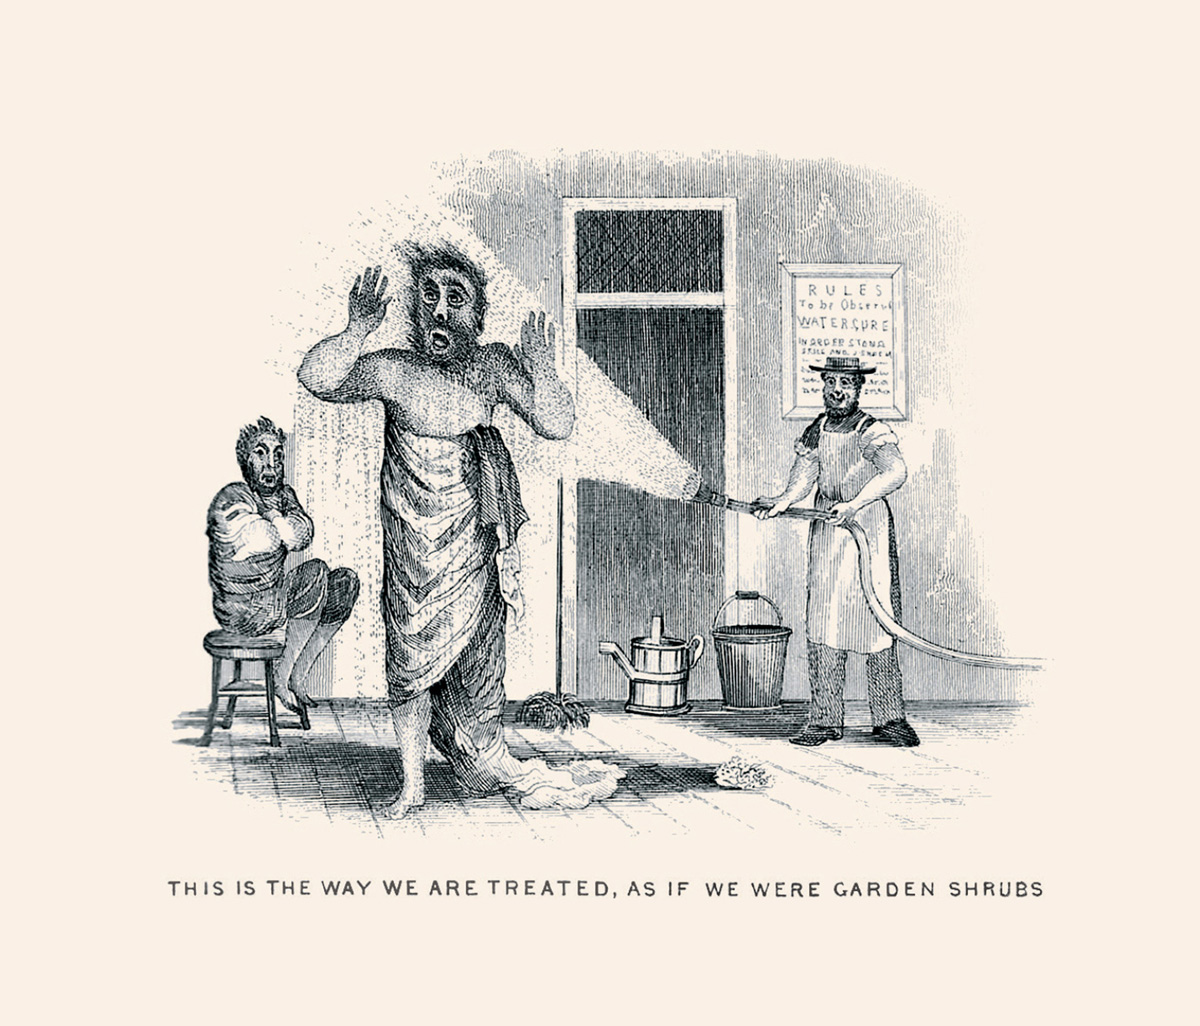 A drawing from the eighteen sixty nine British book “The Water Cure Illustrated of a man being hosed down. The caption reads: “This is the way we are treated, as if we were garden shrubs.”